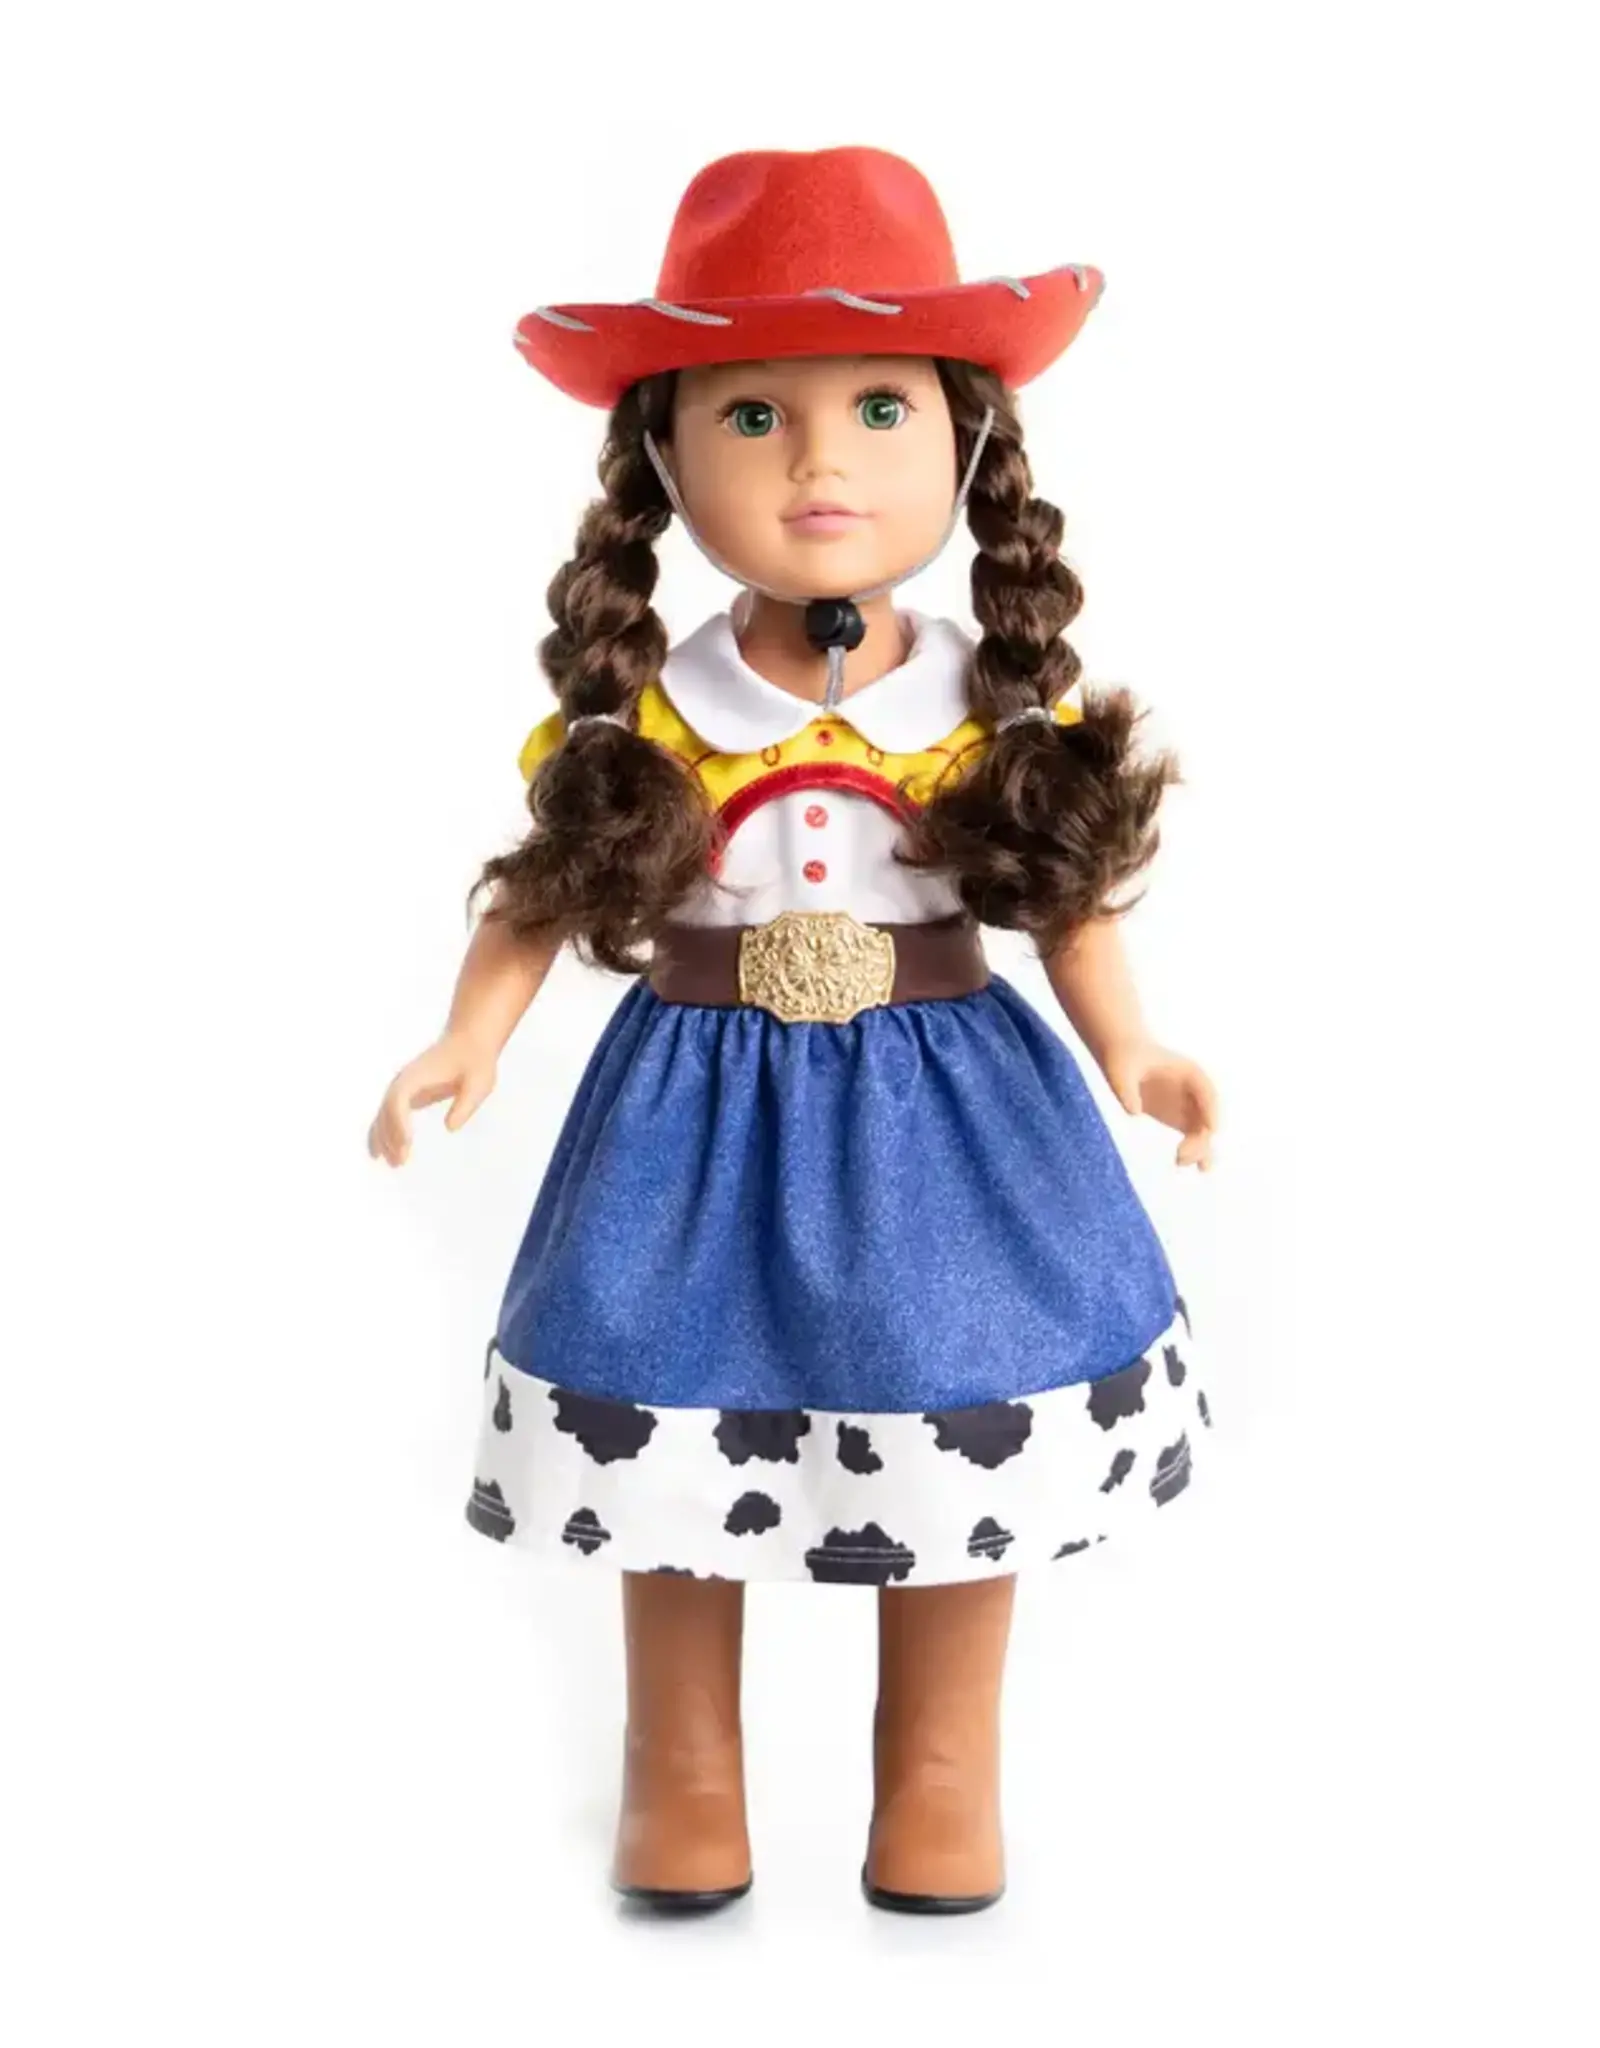 Doll Dress Cowgirl with Hat